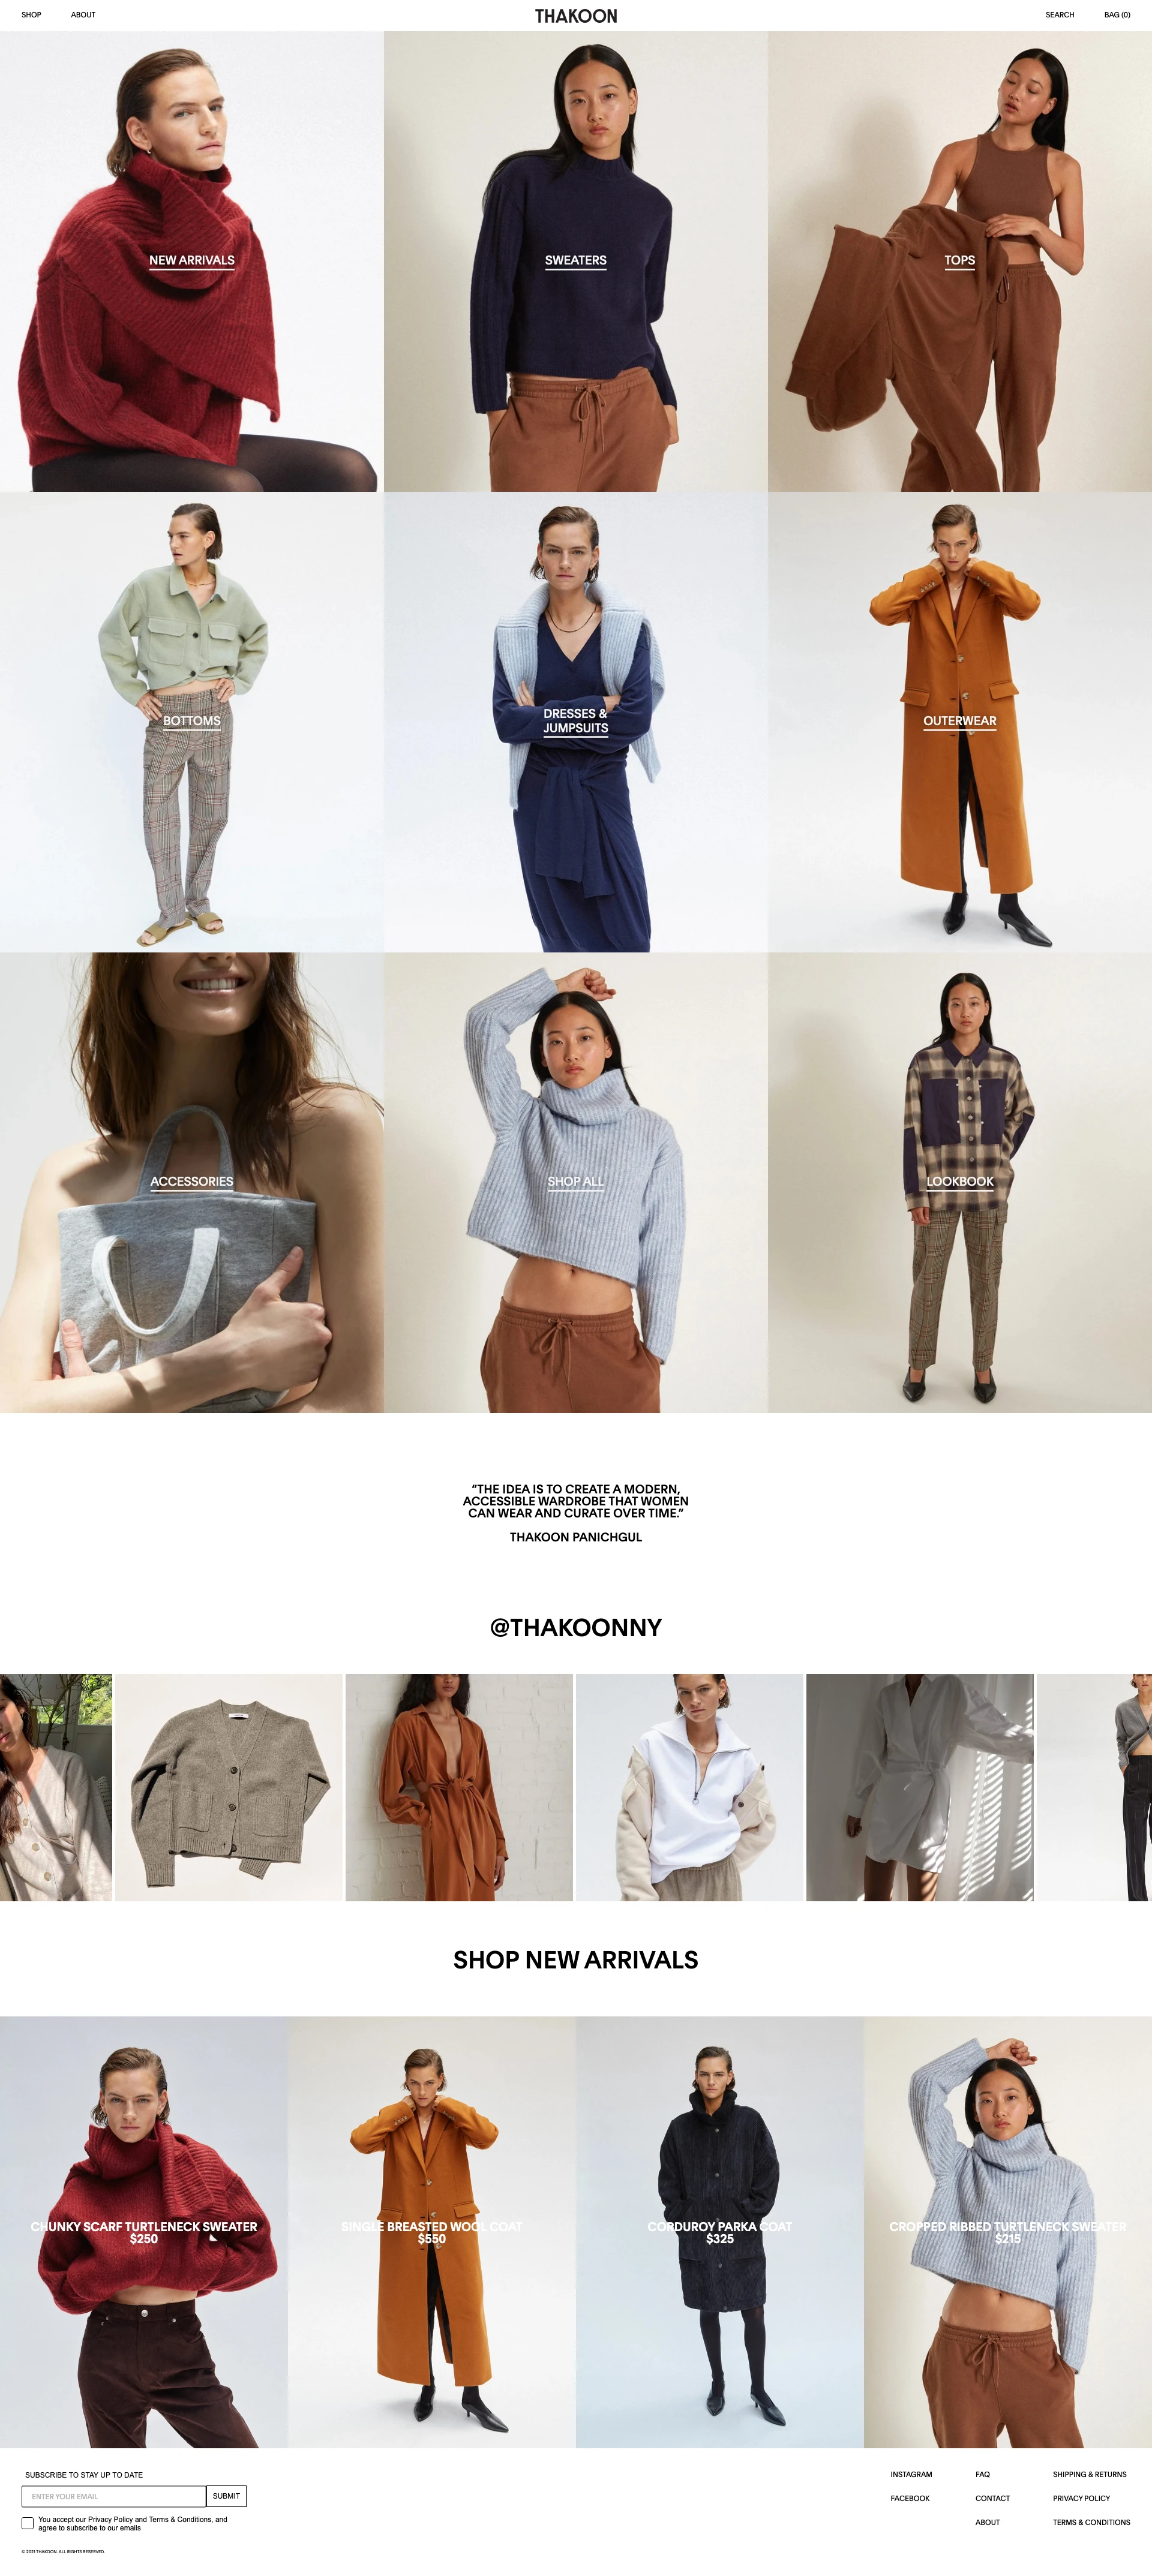 THAKOON Landing Page Example: THAKOON makes wardrobe-building clothes for the modern consumer. He realized that elevated design is not a luxury; it belongs in every modern woman’s wardrobe. The result: a direct-to-consumer line of high-quality pieces at an accessible price point.